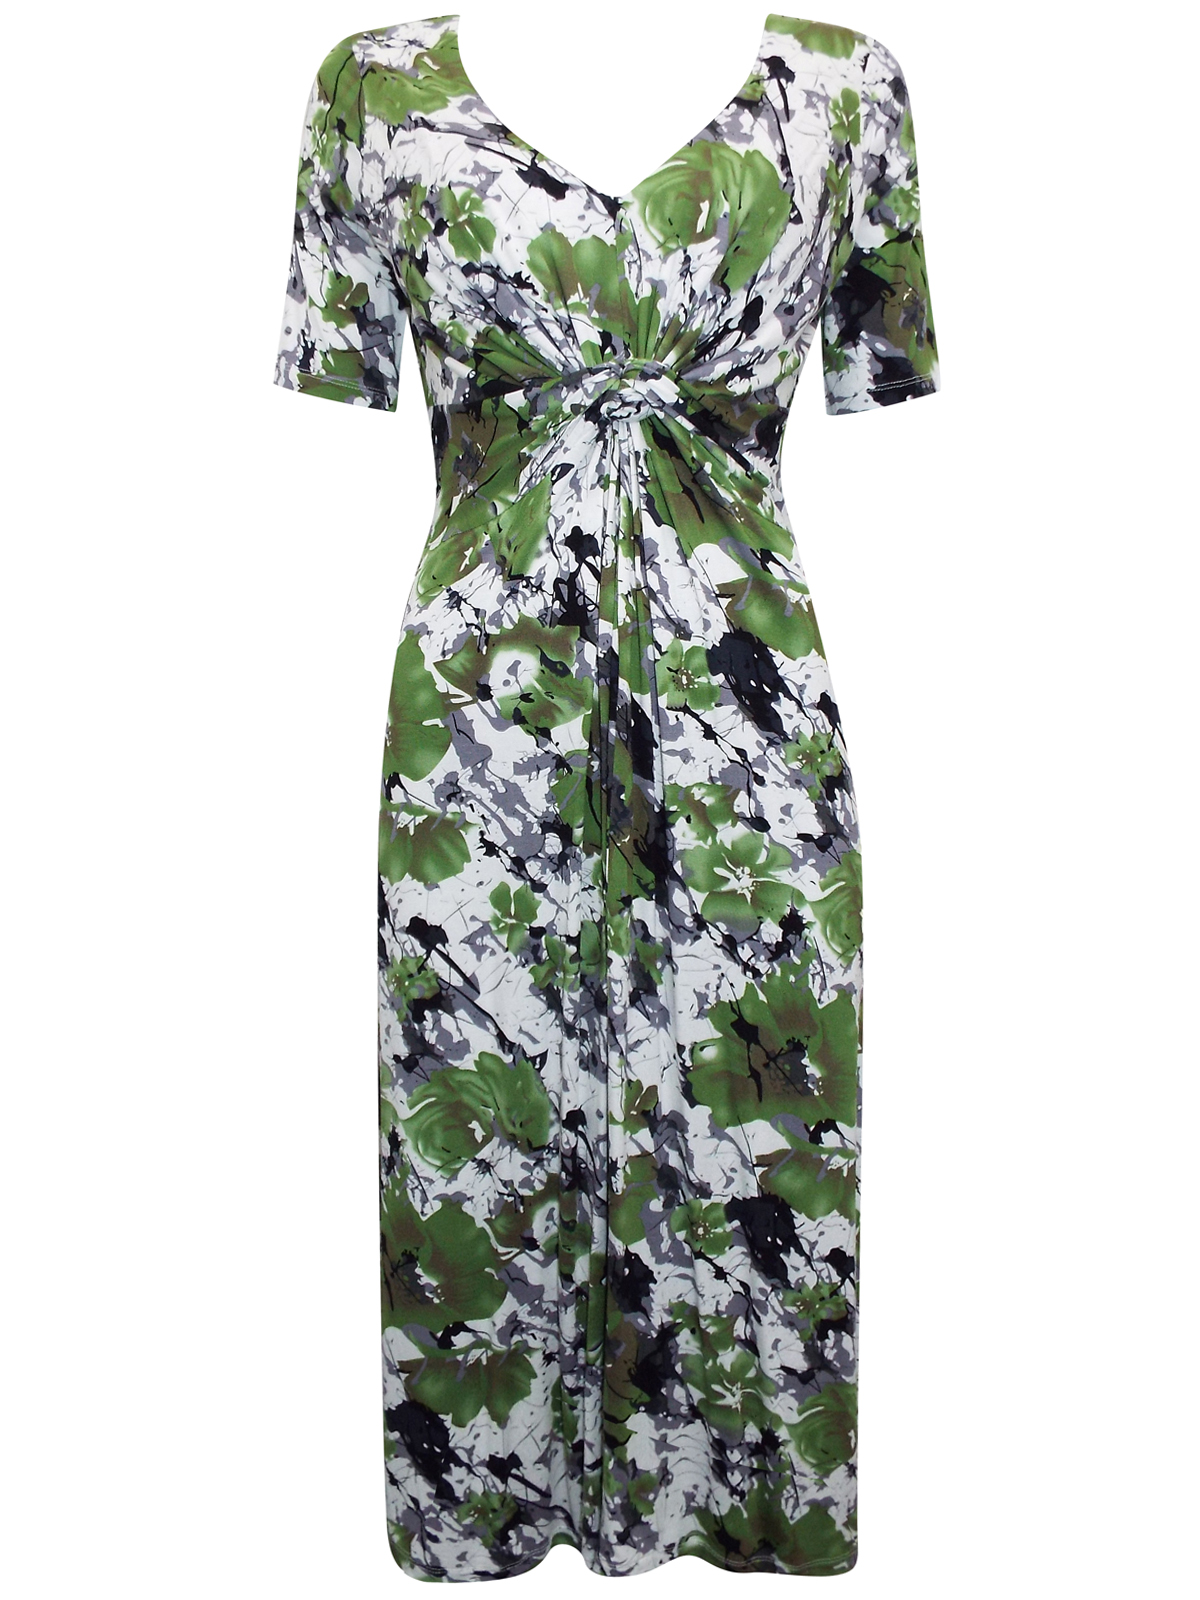 //text.. - - ASSORTED Ladies Printed Dresses - Size 8 to 16